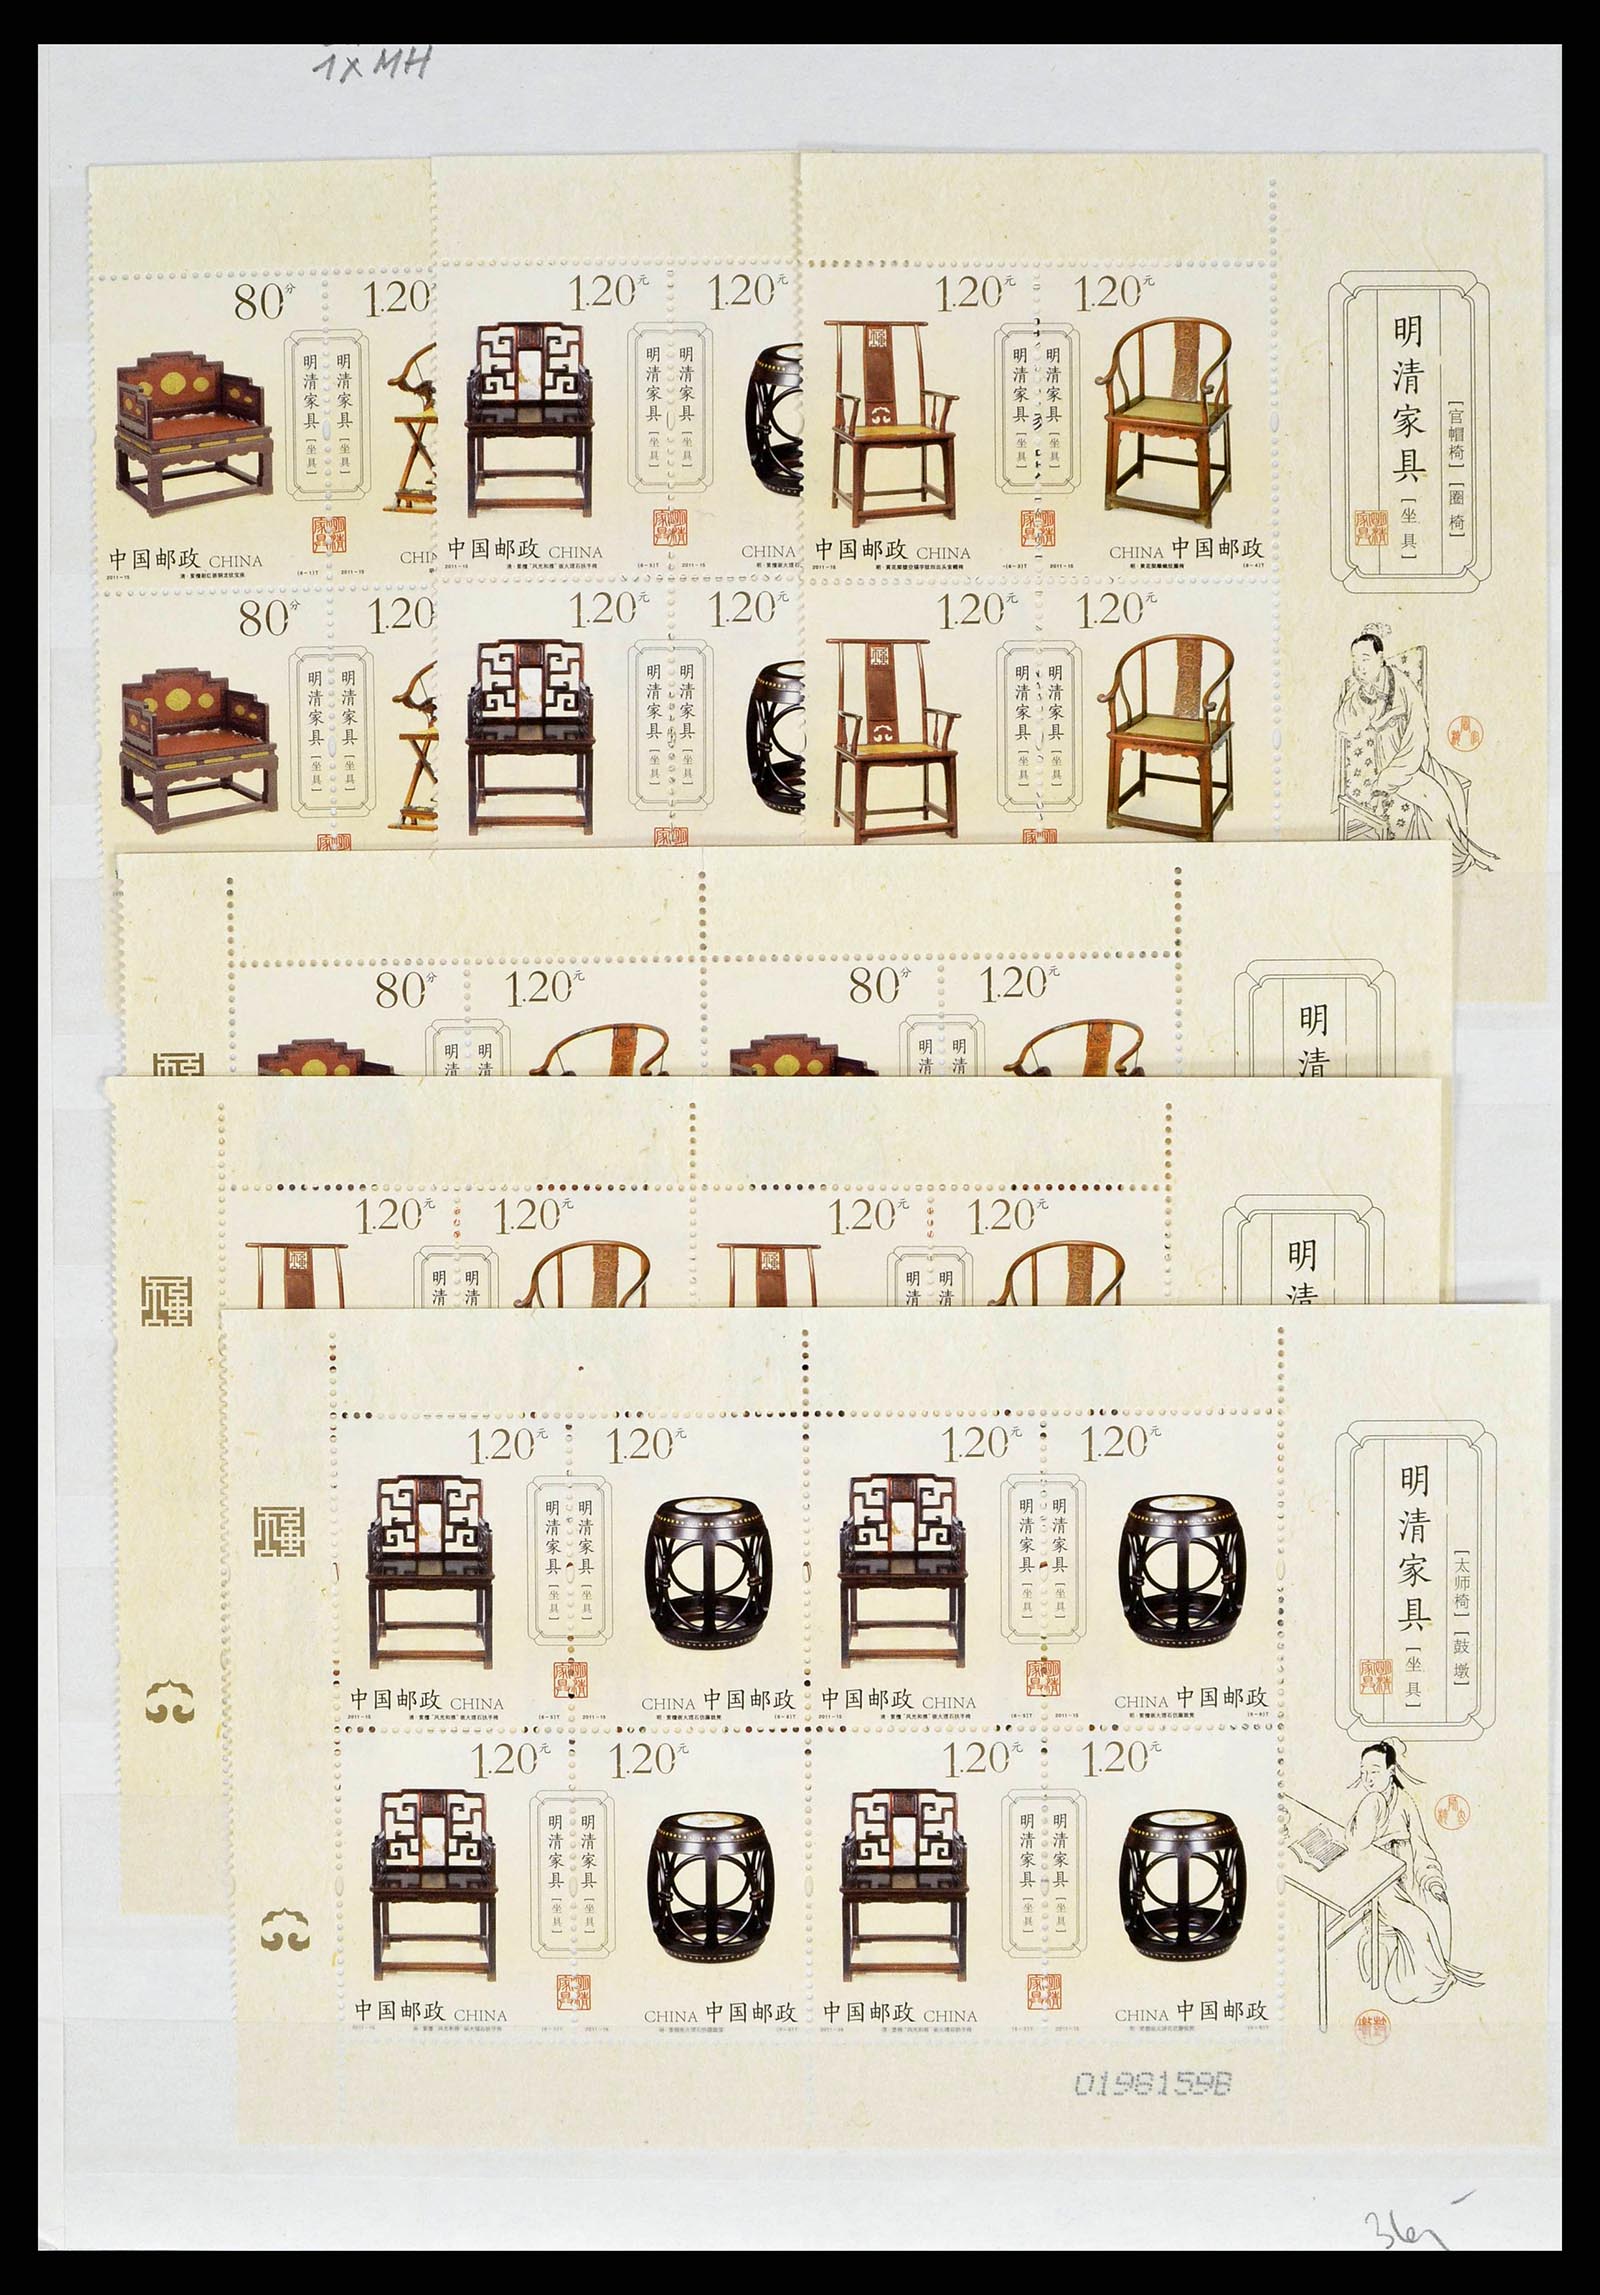 38536 0028 - Stamp collection 38536 China 2011.